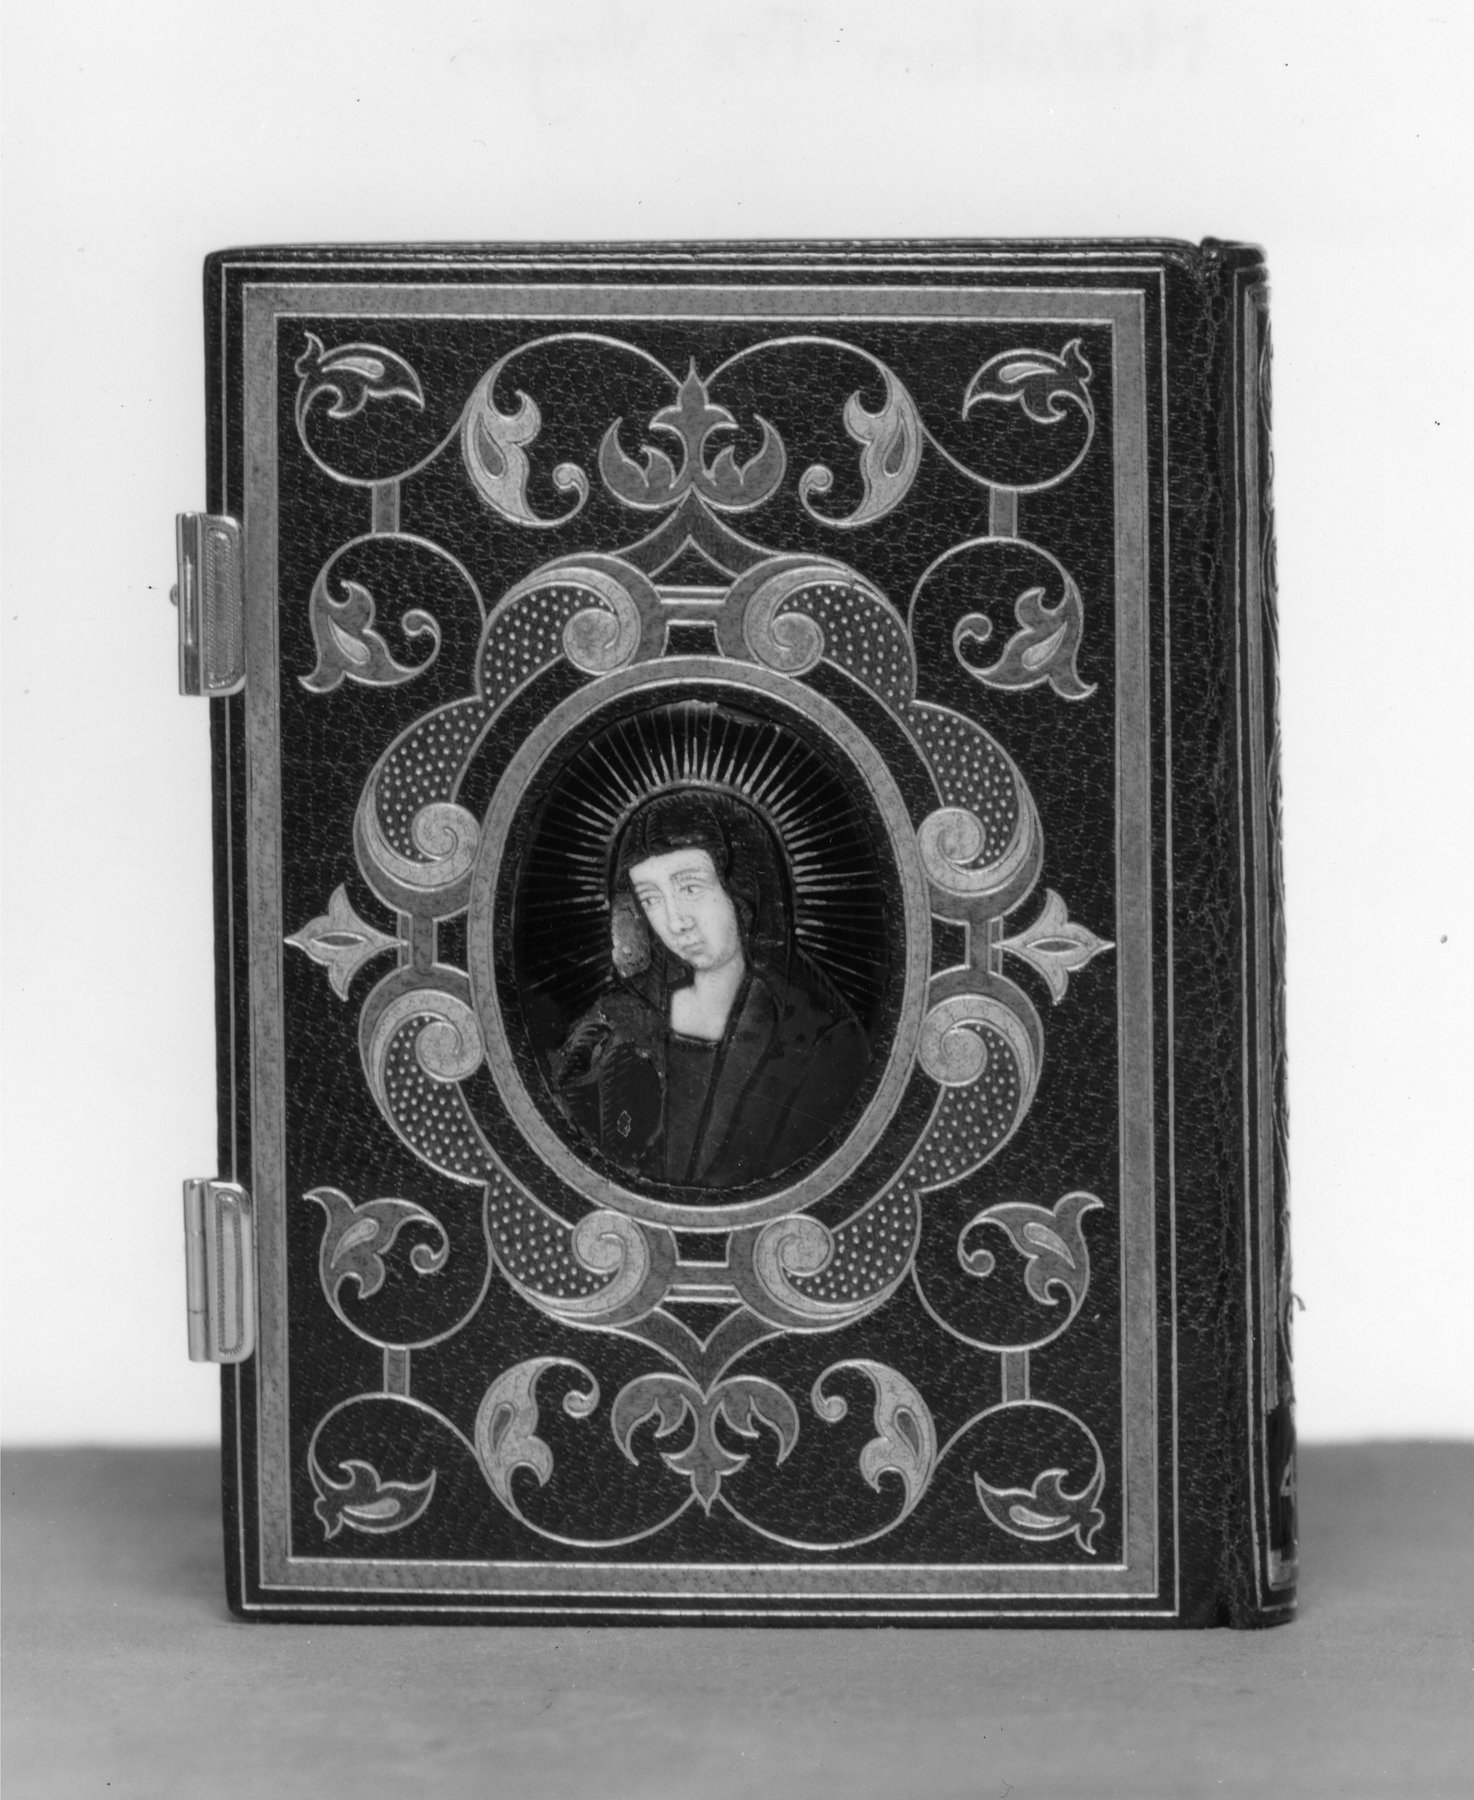 Image for Bookbinding with a medallion of the Virgin